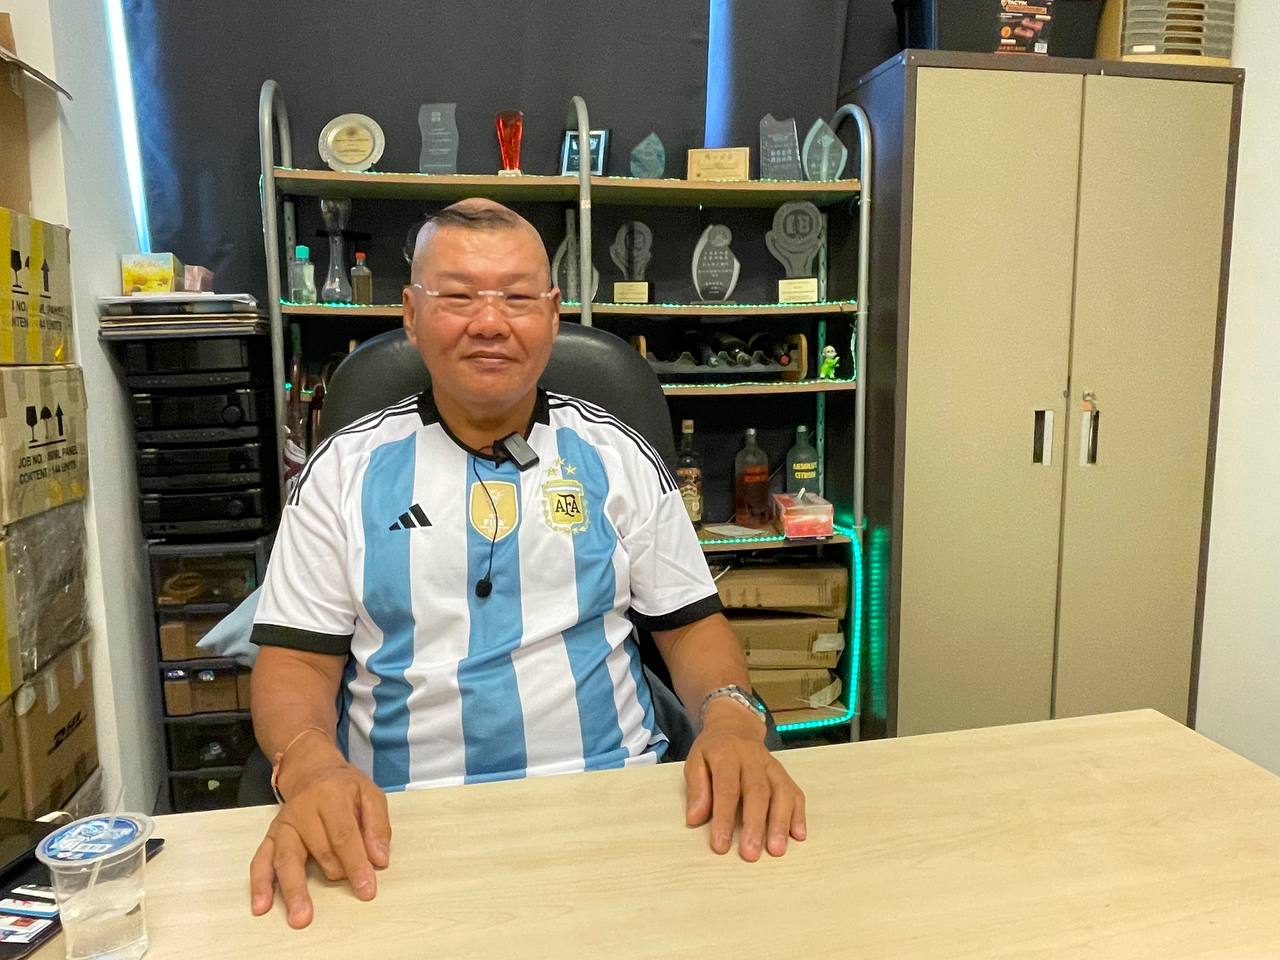 Yu is dressed in a blue-and-white striped shirt. He sits at a table and smiles at the camera. Behind him, there is a shelf and cupboard full of awards, bottles, and other items.